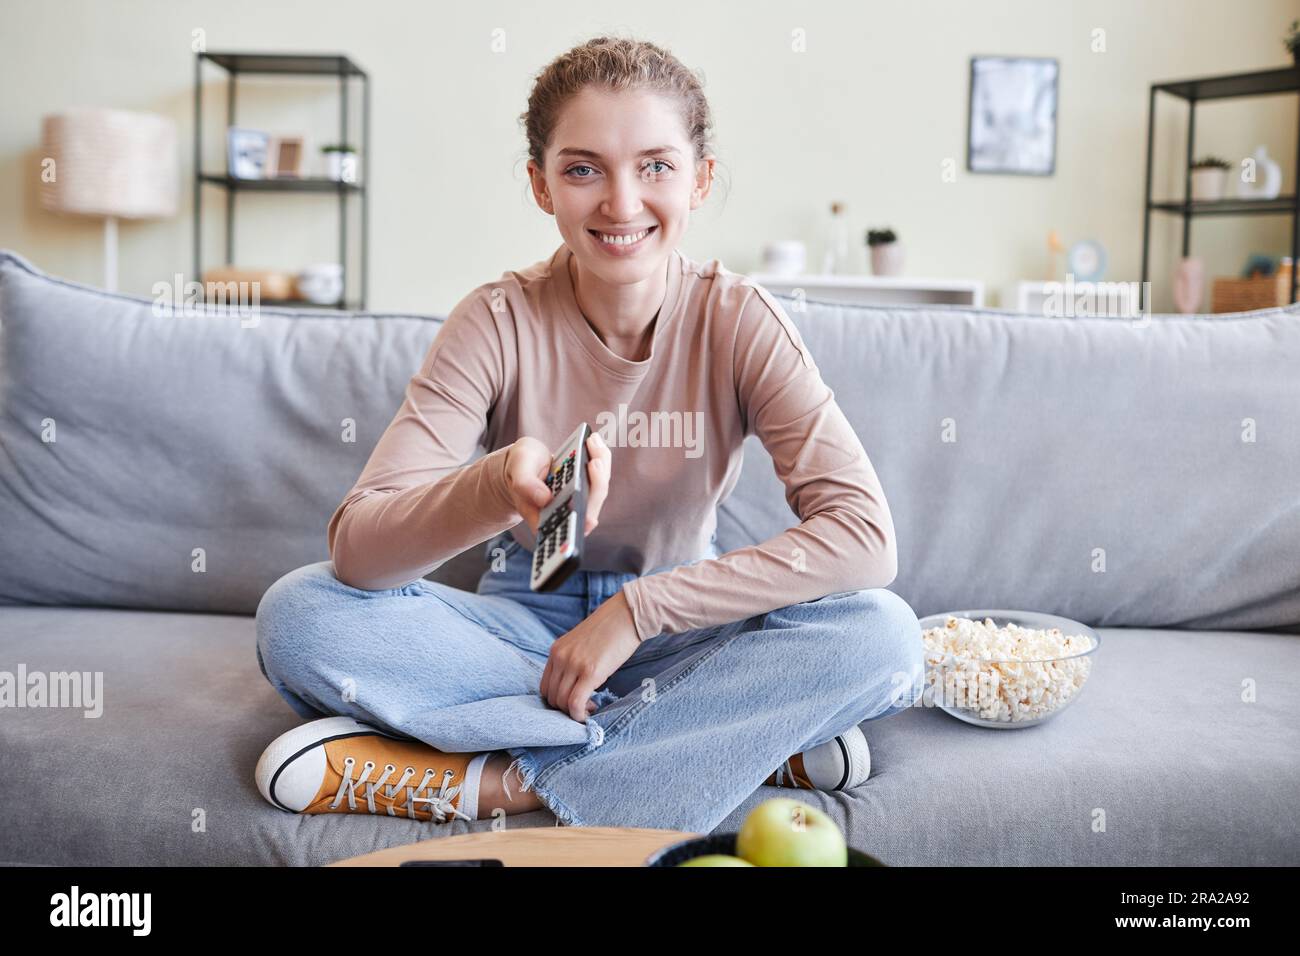 Front view portrait of carefree young woman sitting on sofa with legs crossed and holding remote control looking at camera, copy space Stock Photo